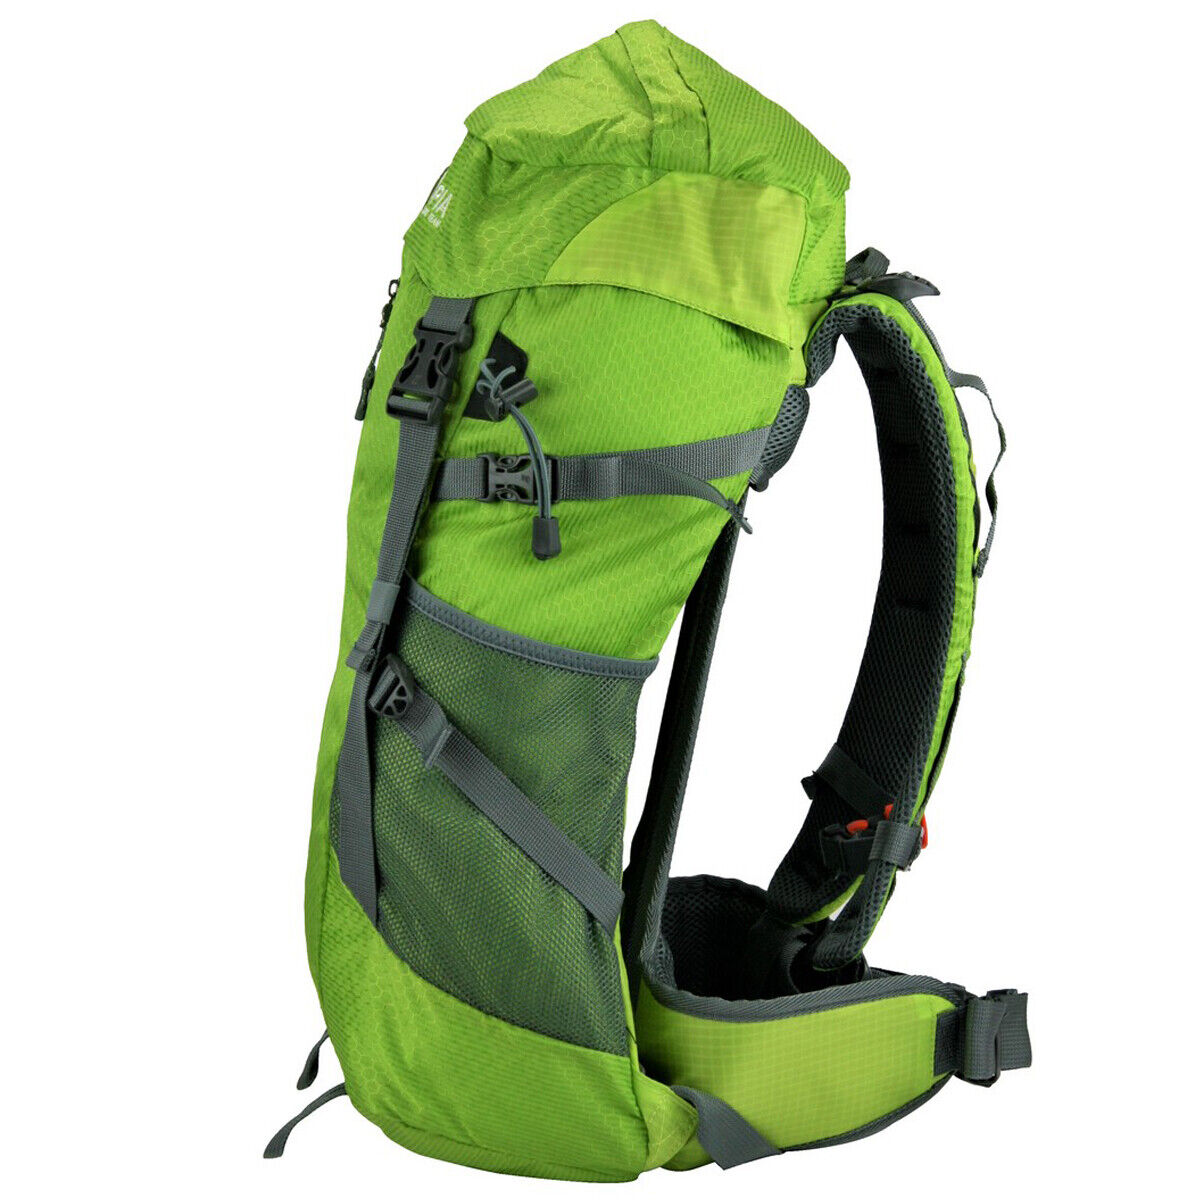 Lime Olympia Explorer 22L Hiking Hiking Backpack with Built-in R